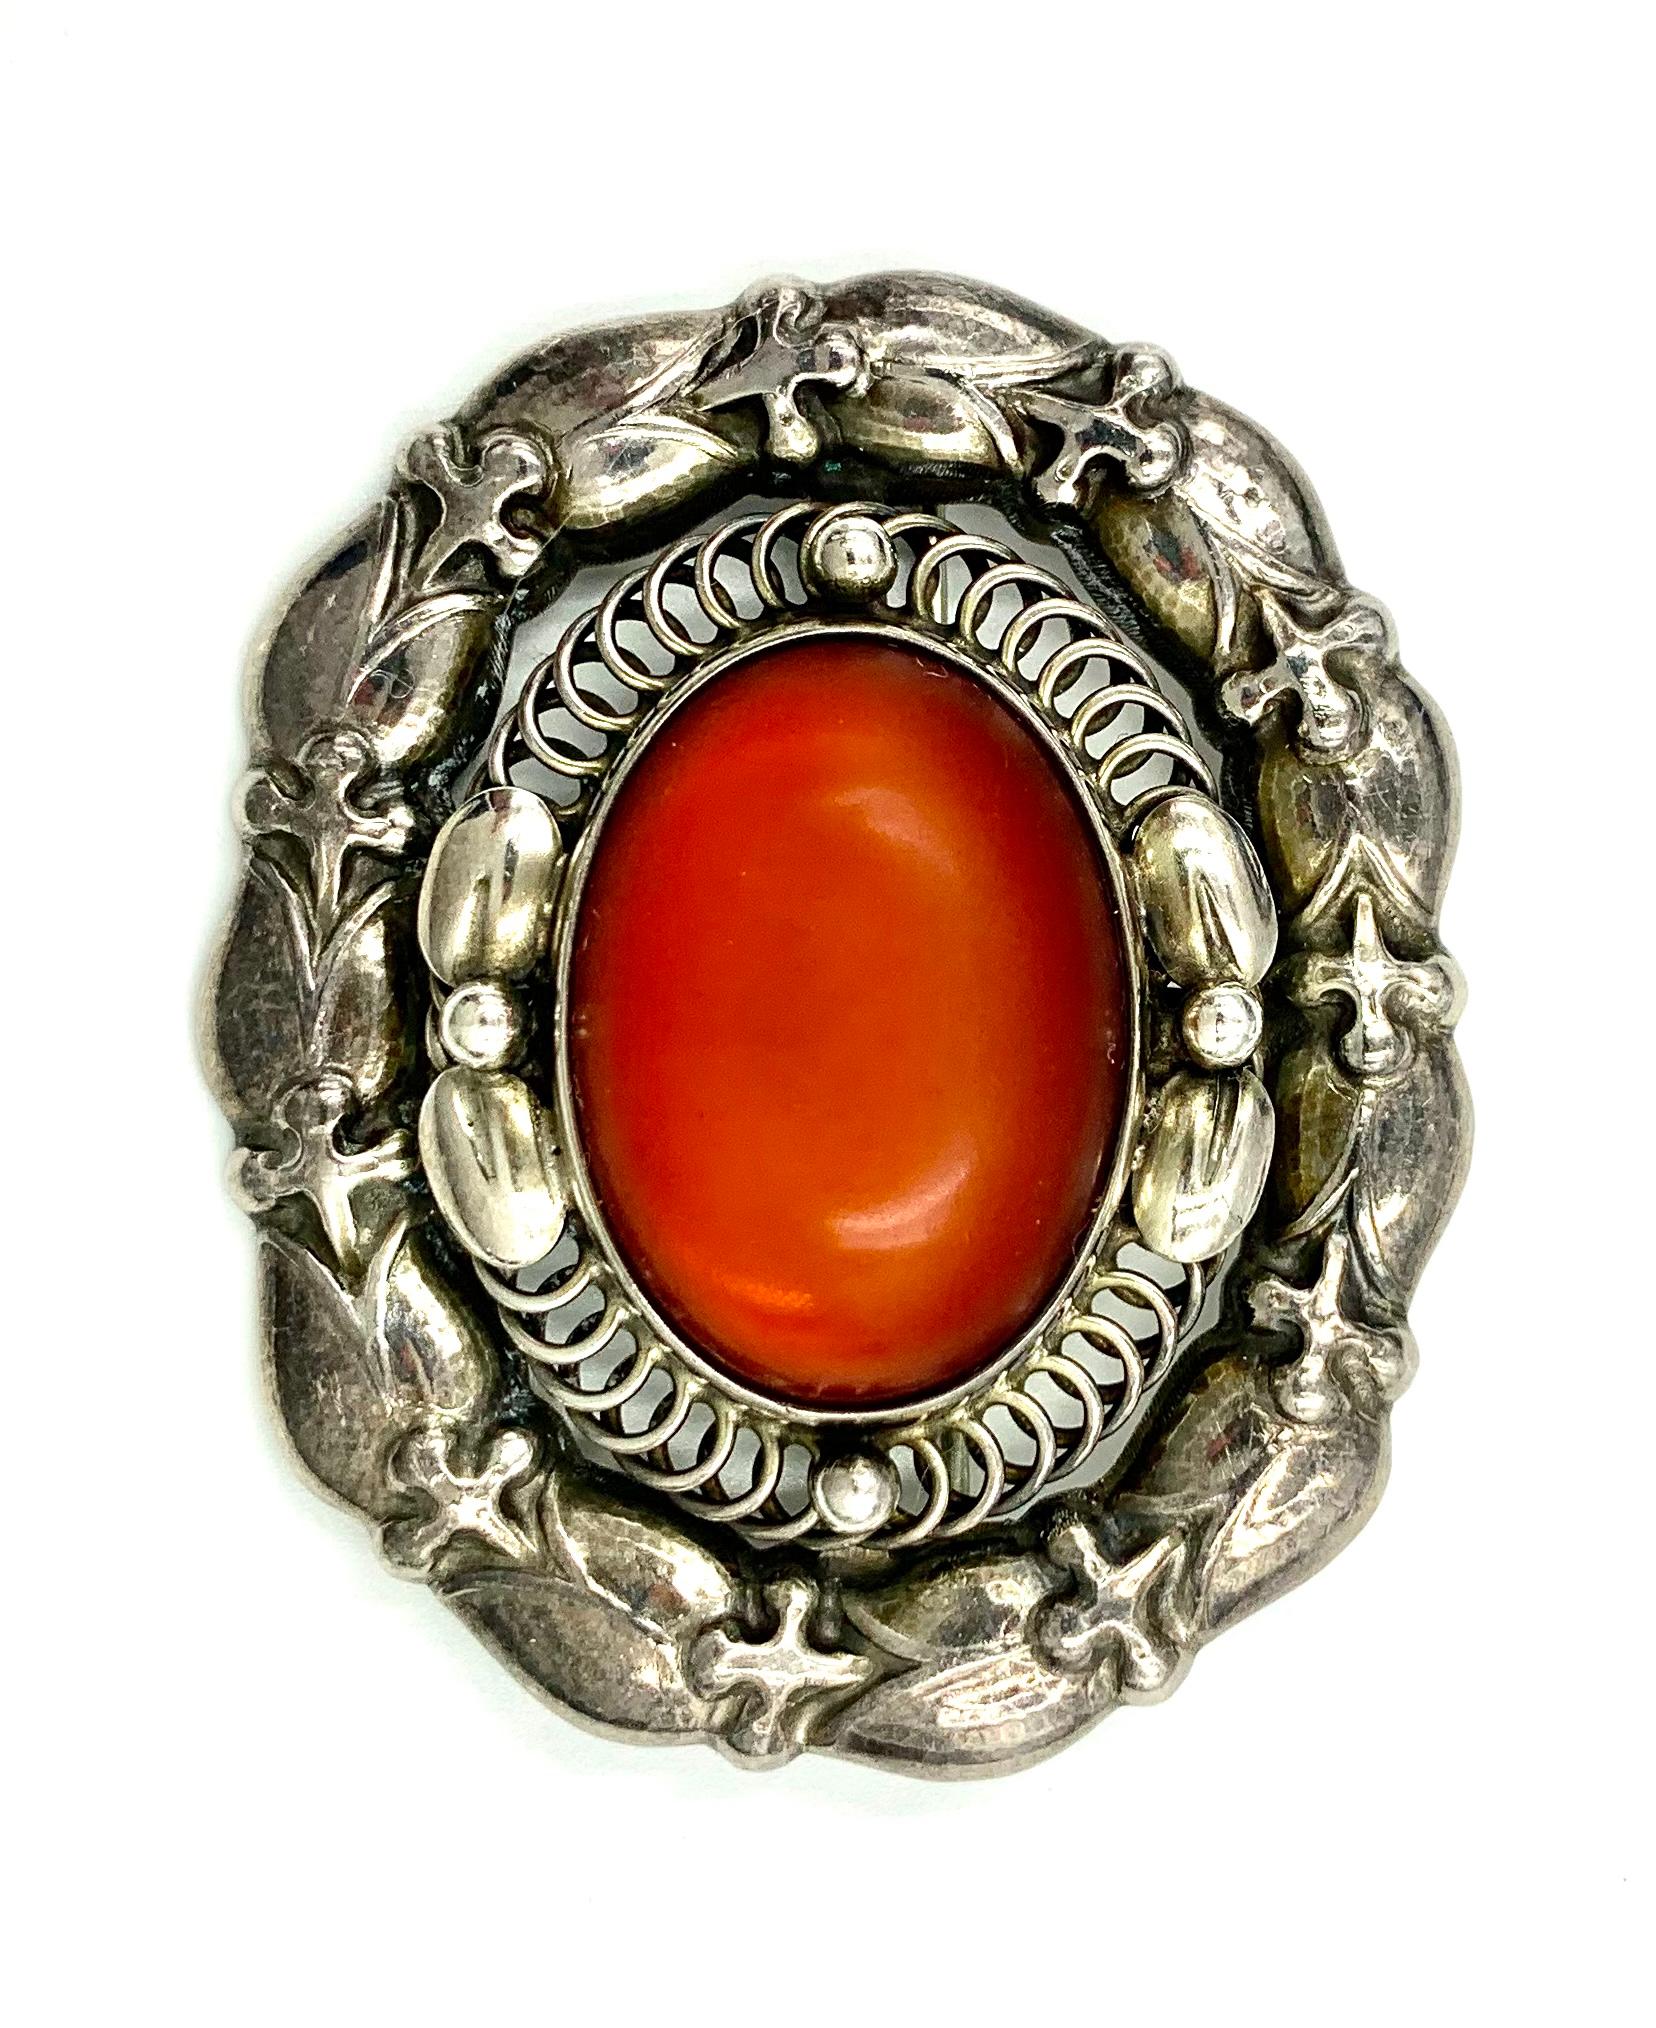 Early Estate Georg Jensen Cabochon Amber Sterling Silver Pendant Brooch For Sale 5